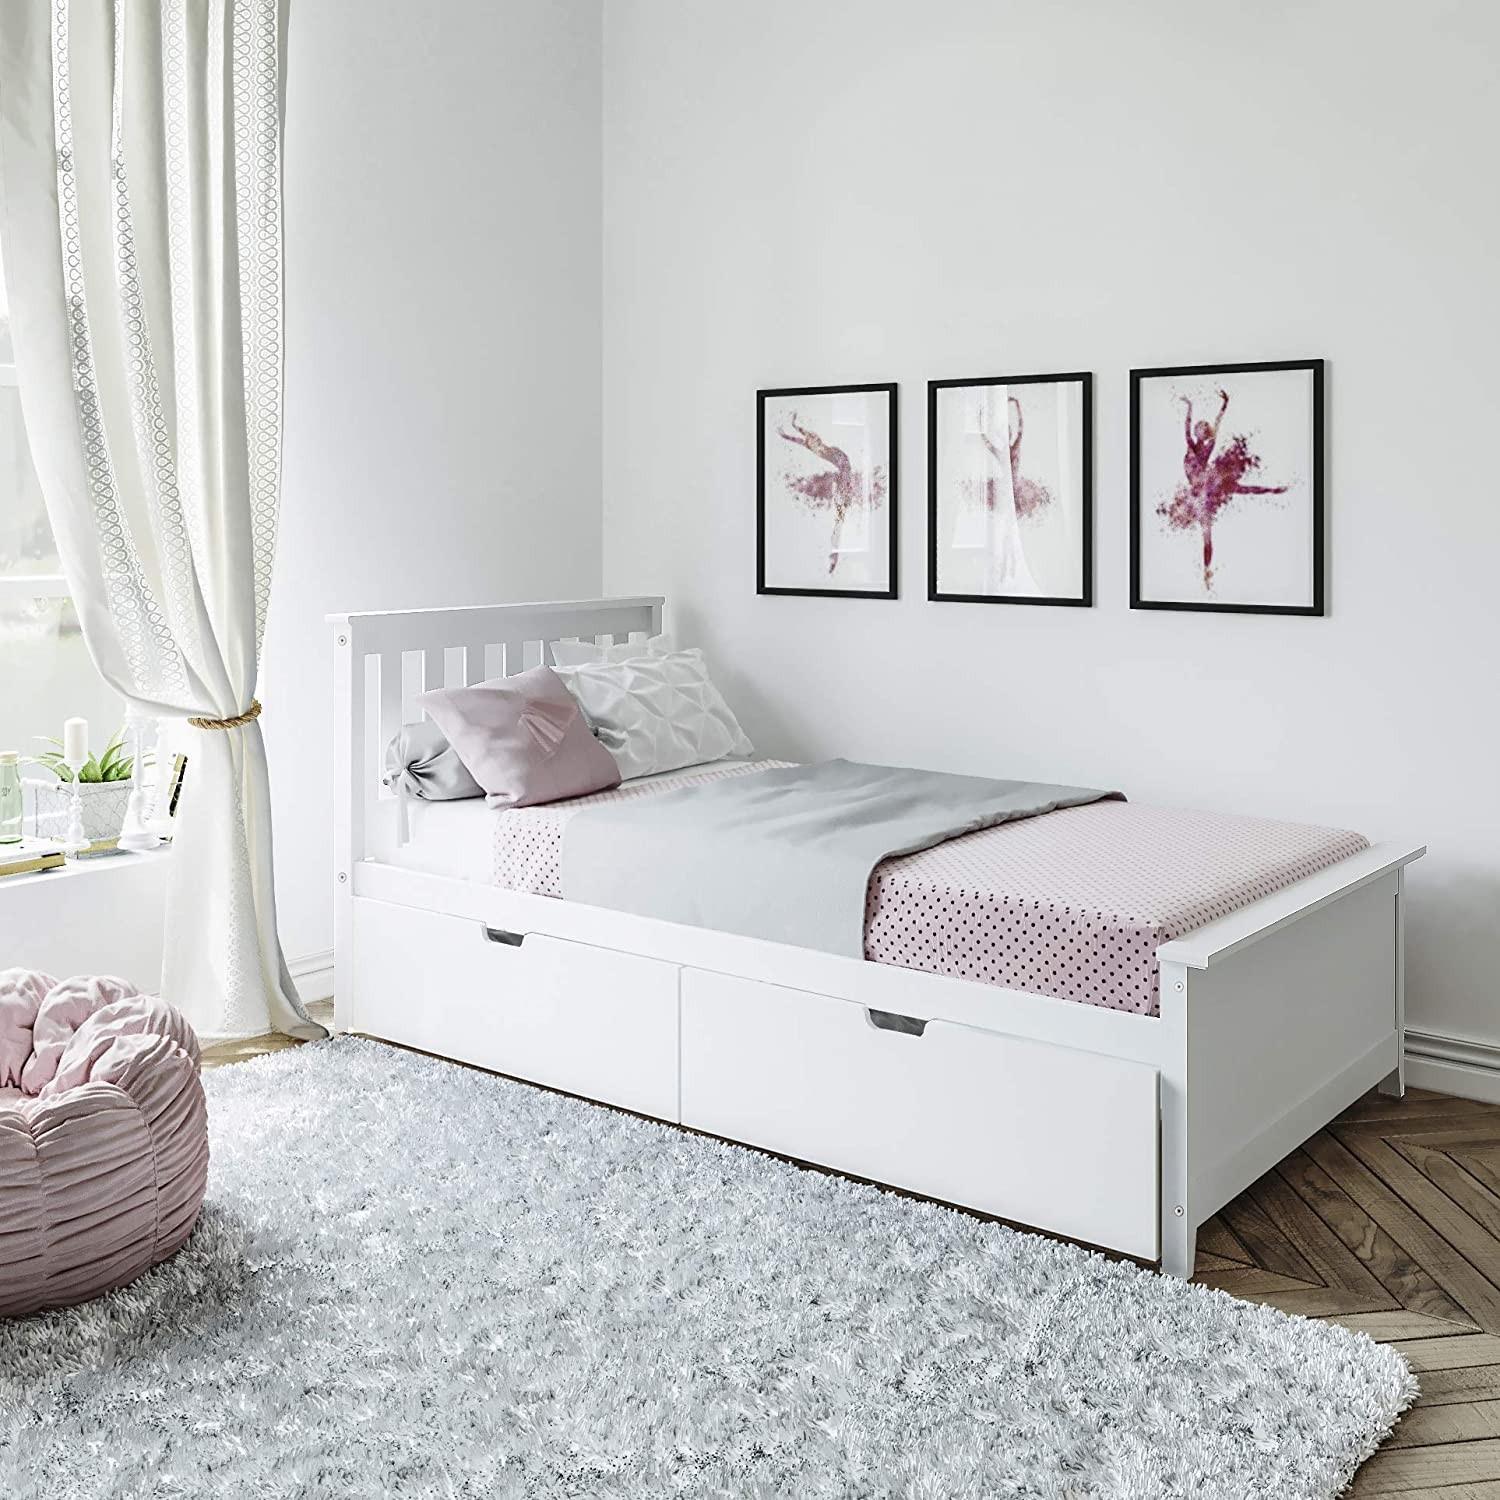 SOLID WOOD TWIN SIZE  PLATFORM BED IN WHITE FINISH WITH STORAGE